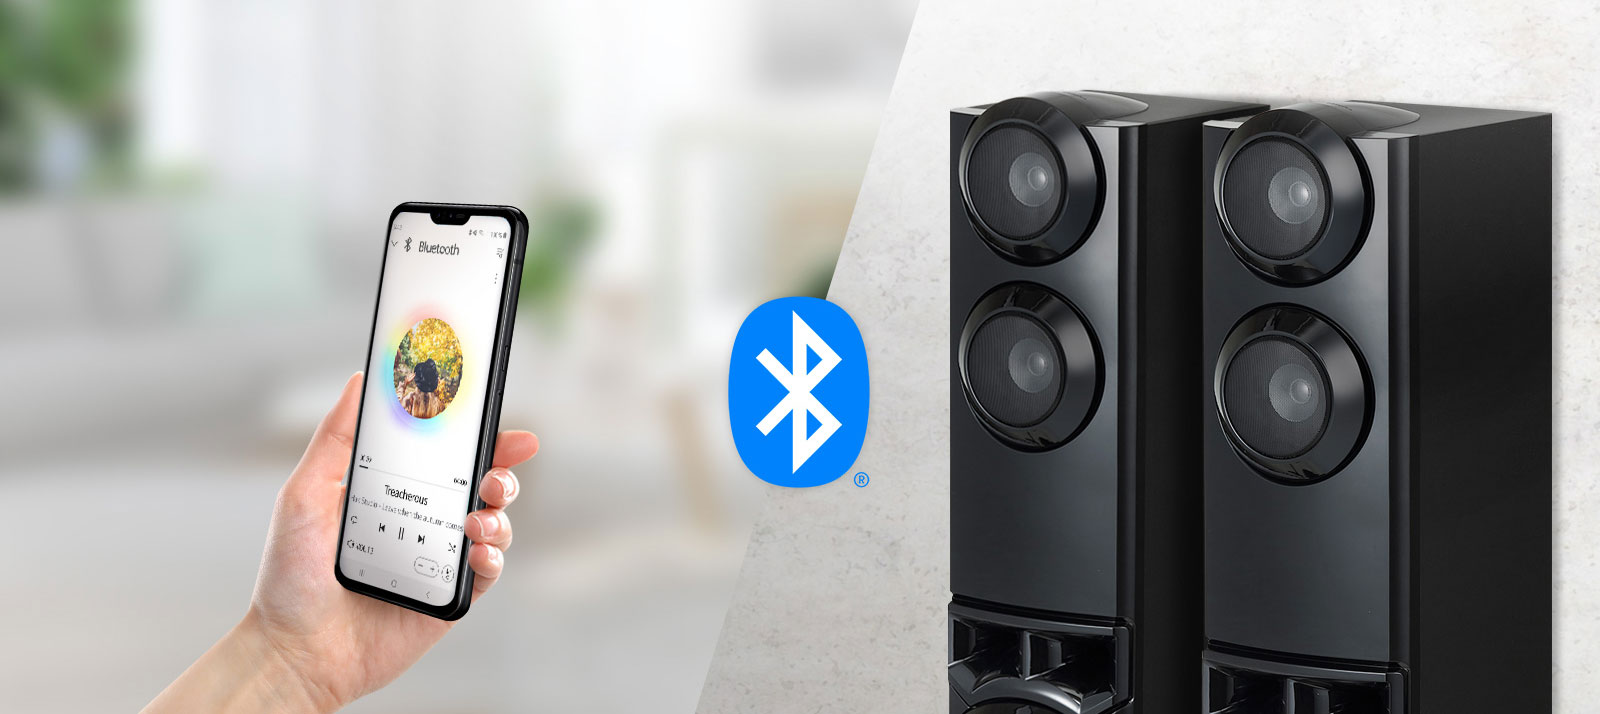 A smartphone and speakers are connected, and there is a Bluetooth logo between speakers and a smartphone.